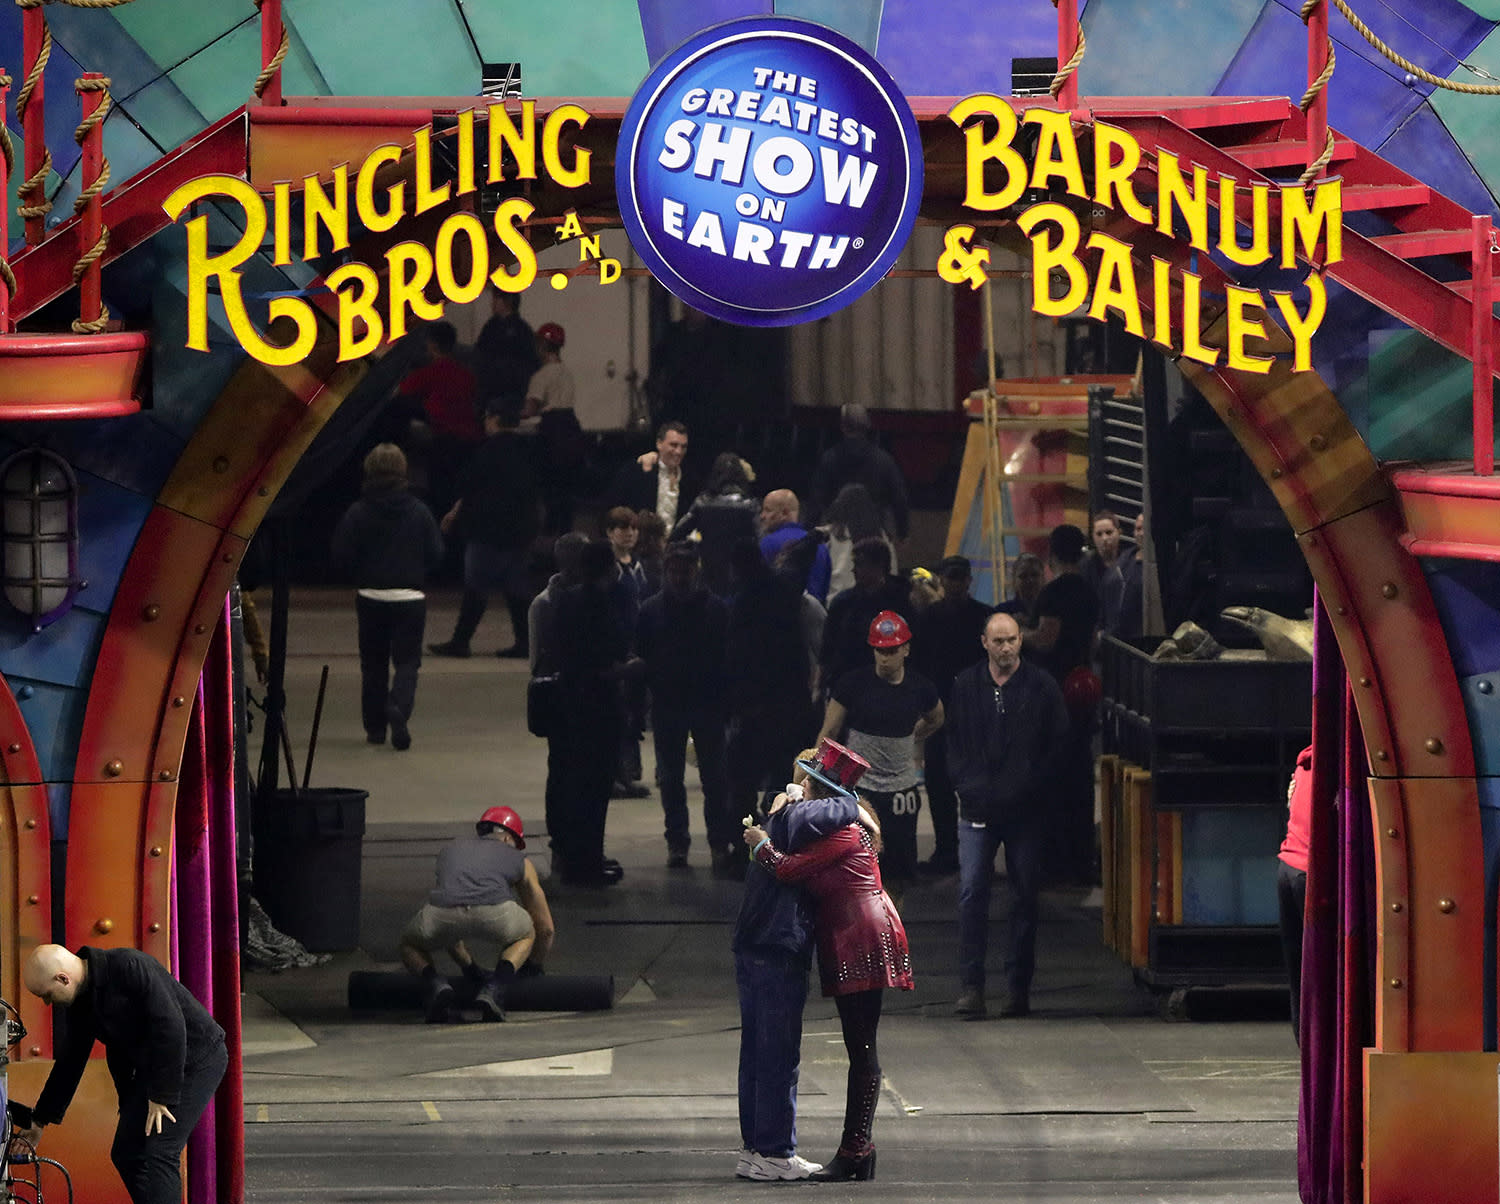 Leaving the life: The final days of the Ringling Bros. circus